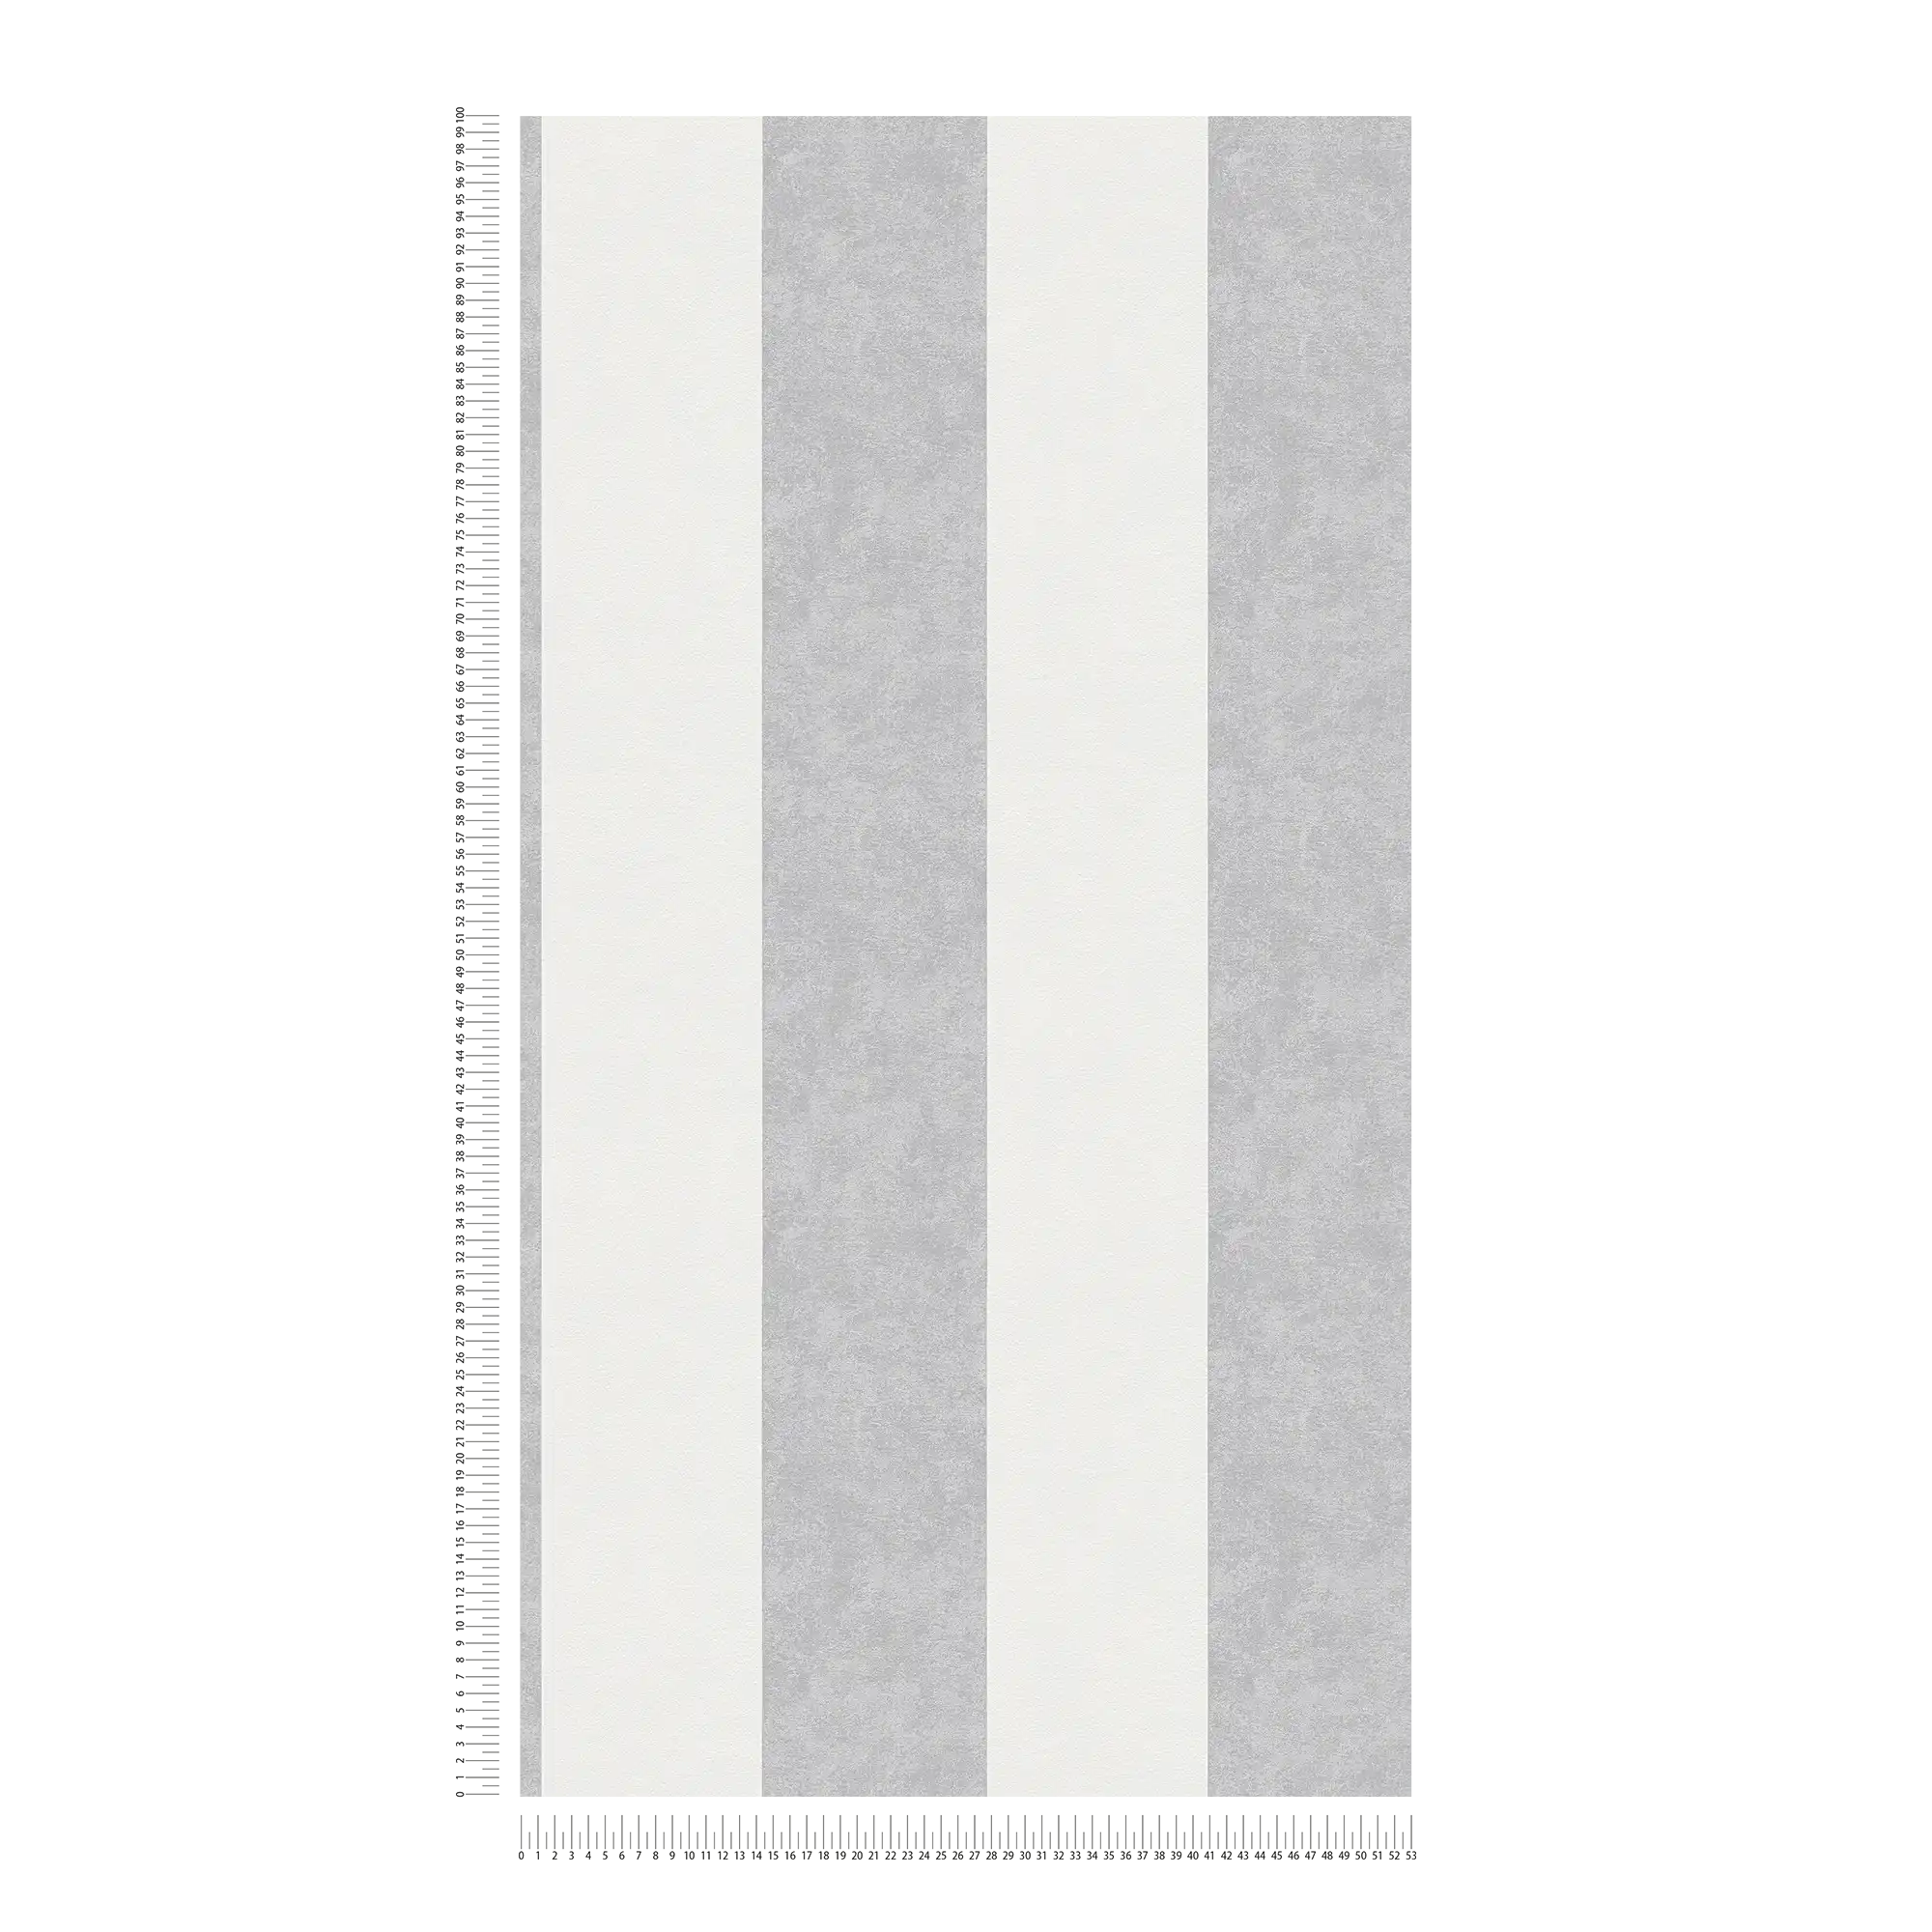             Striped wallpaper with texture pattern - grey
        